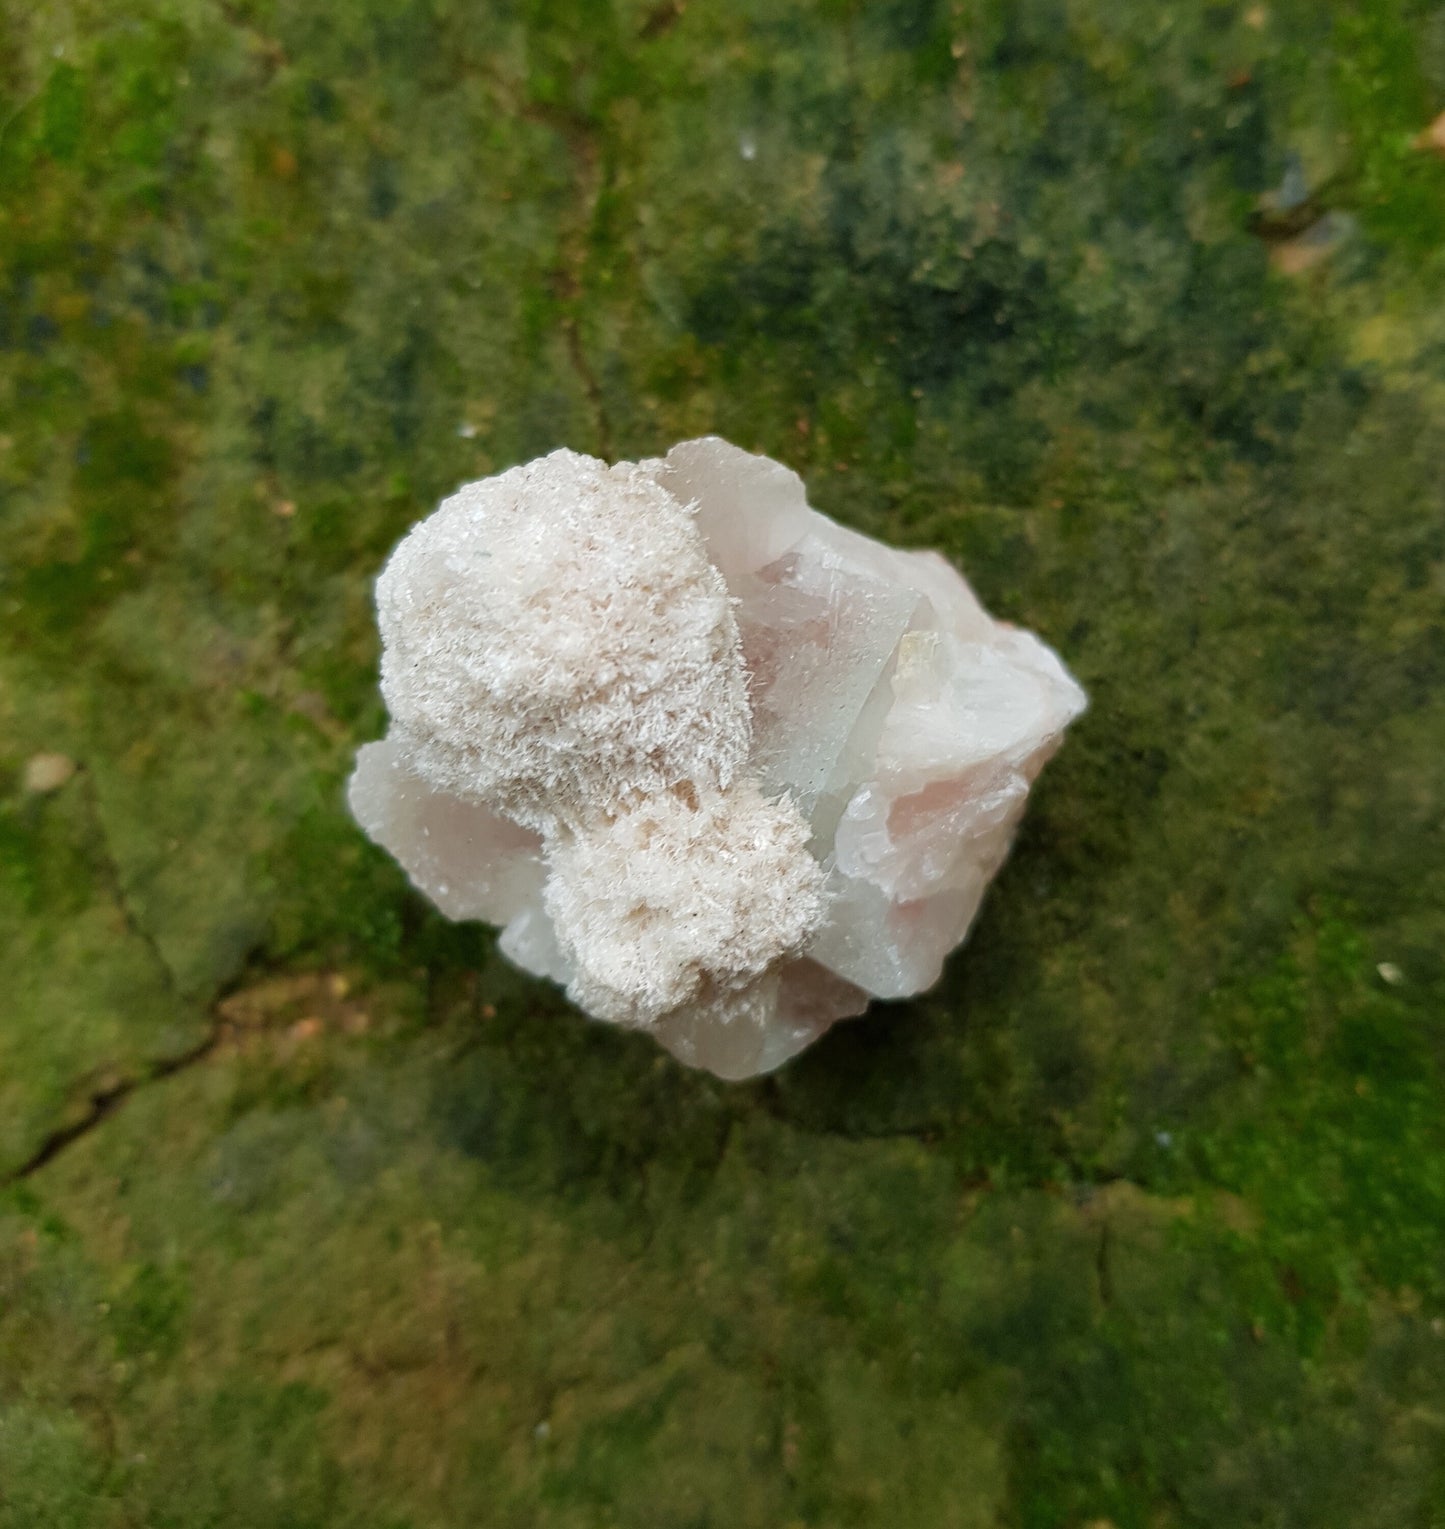 Small Natural Crystal Cluster, Apophyllite on Stilbite And Mordenite, Healing Crystal, Mineral Specimen, Mineral Collection